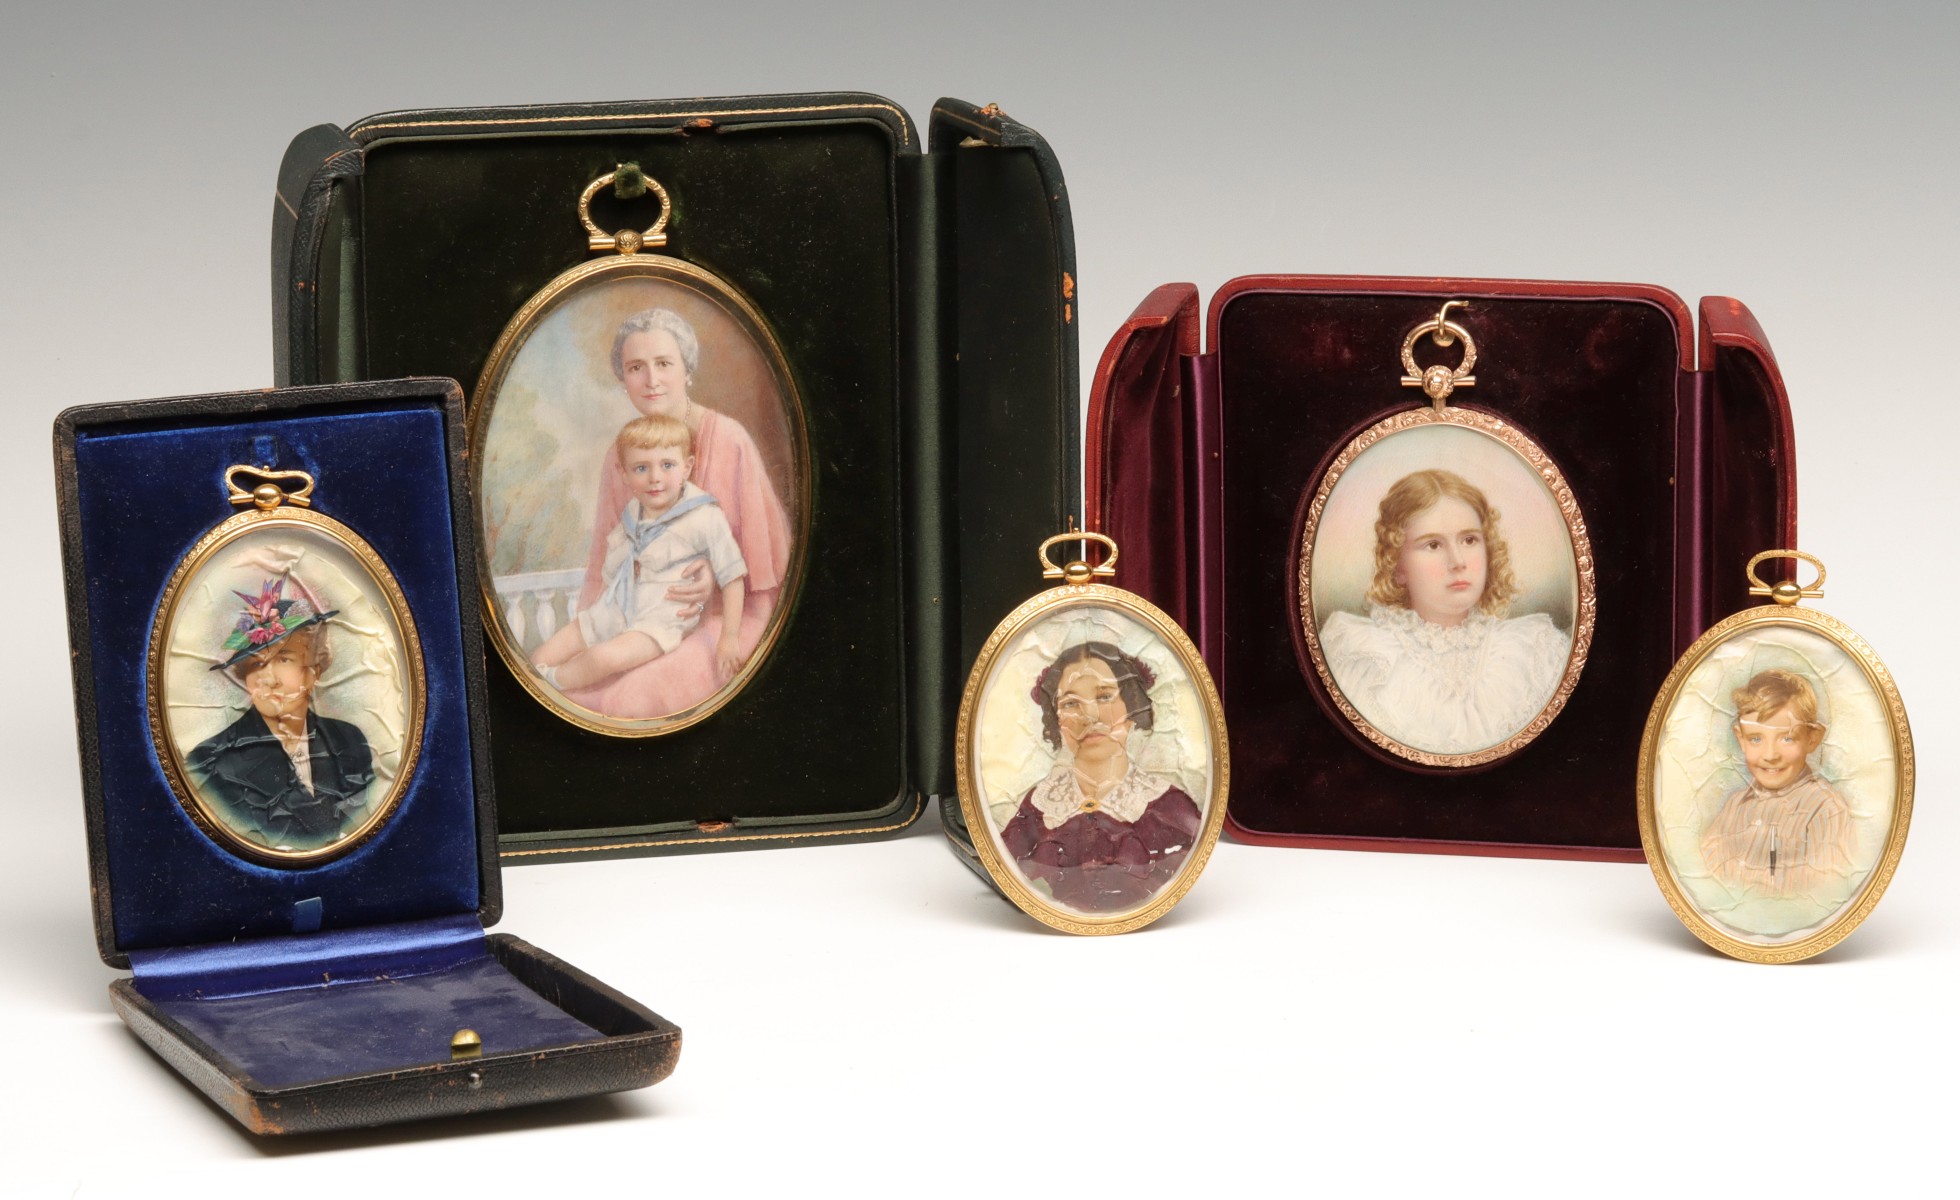 GERALD HAYWARD (1845-1926) AND OTHER MINIATURE PORTRAITS